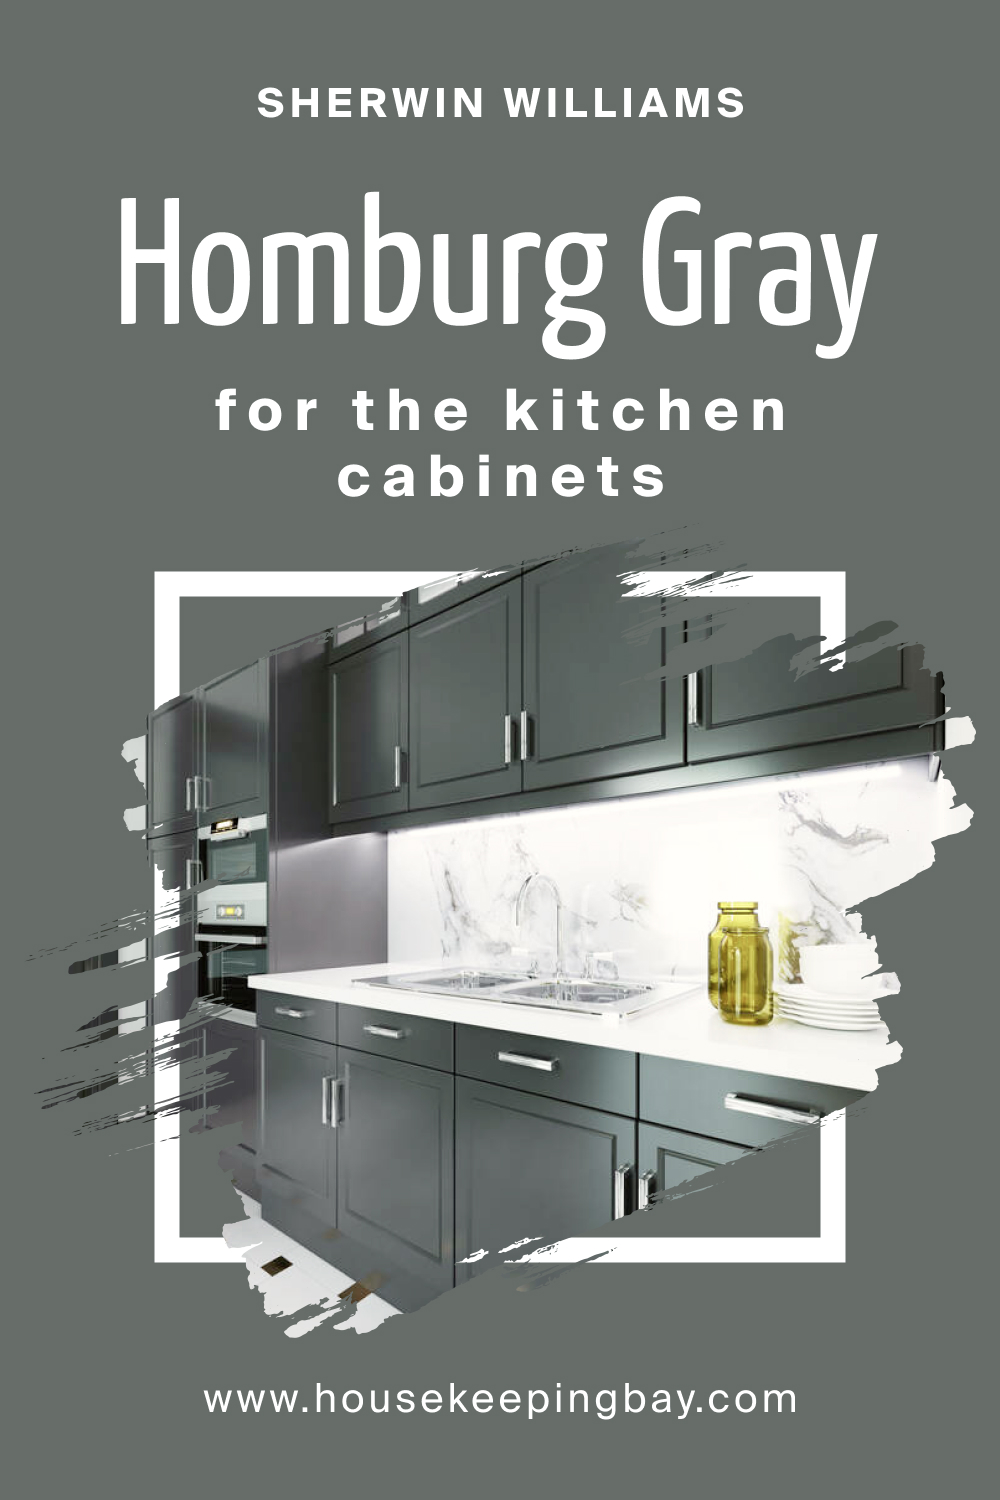 Sherwin Williams. SW 7622 Homburg Gray For the For the Kitchen Cabinets